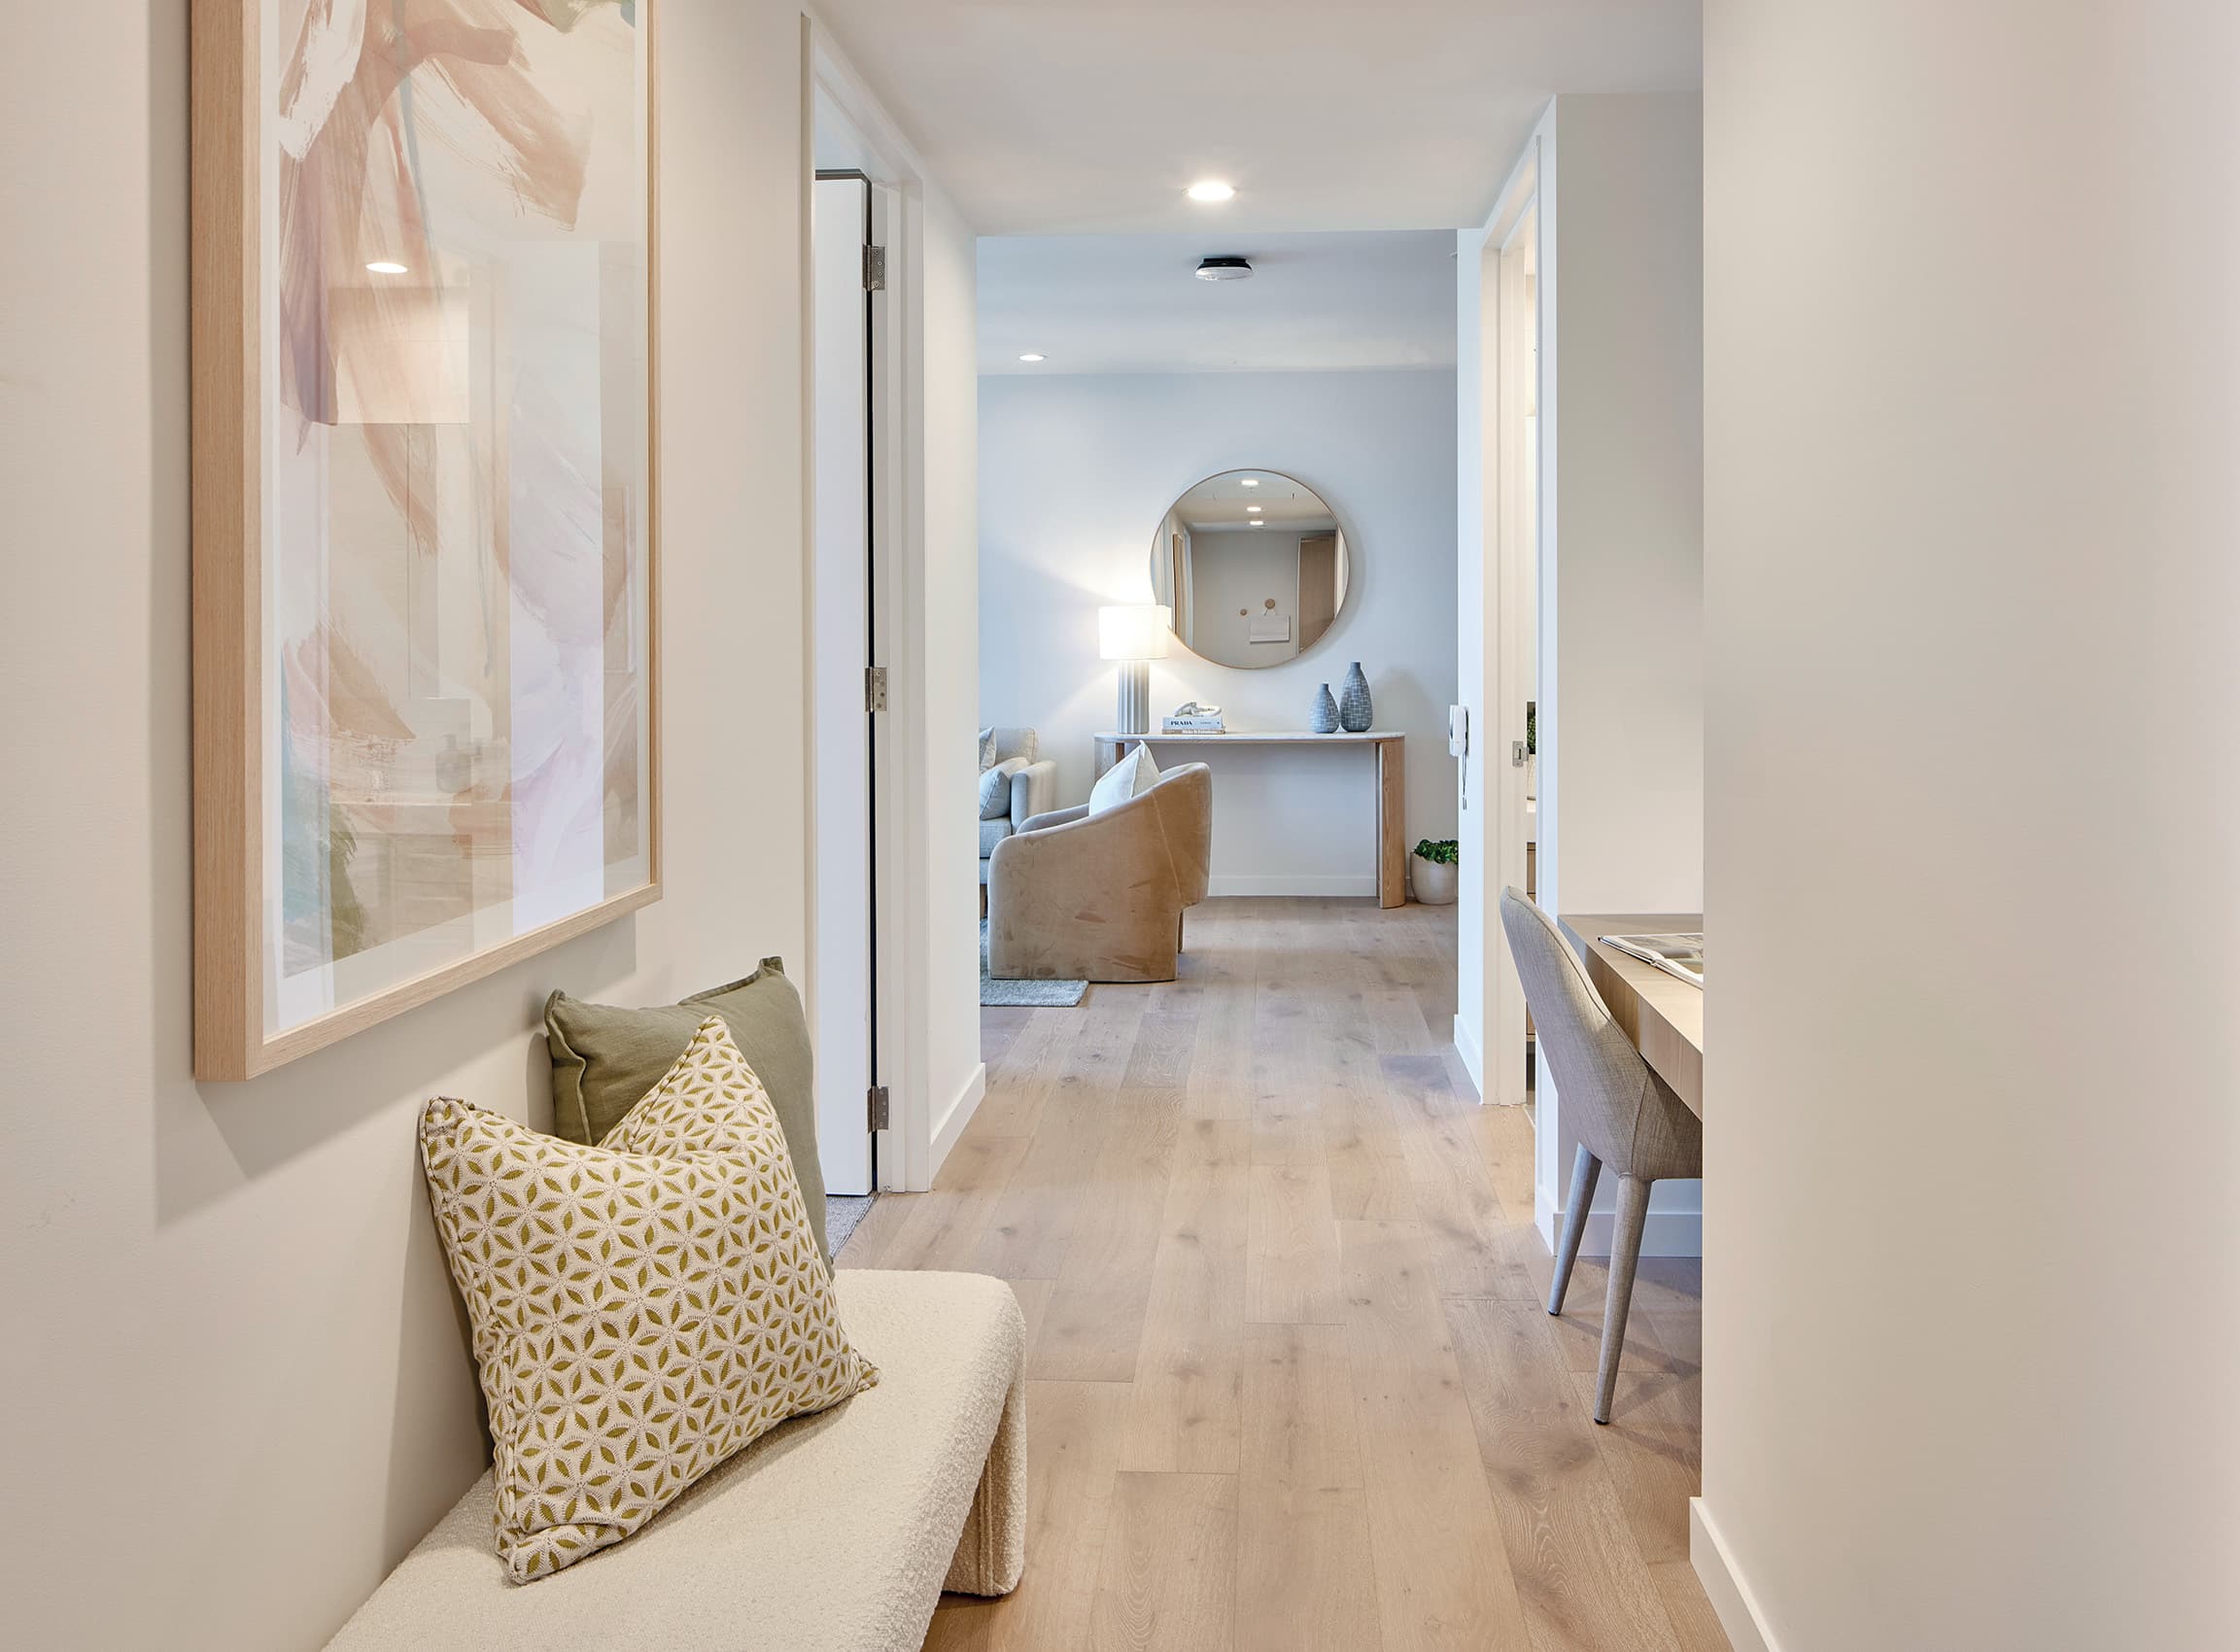 Live in comfort and style in a beautiful apartment to call your own.